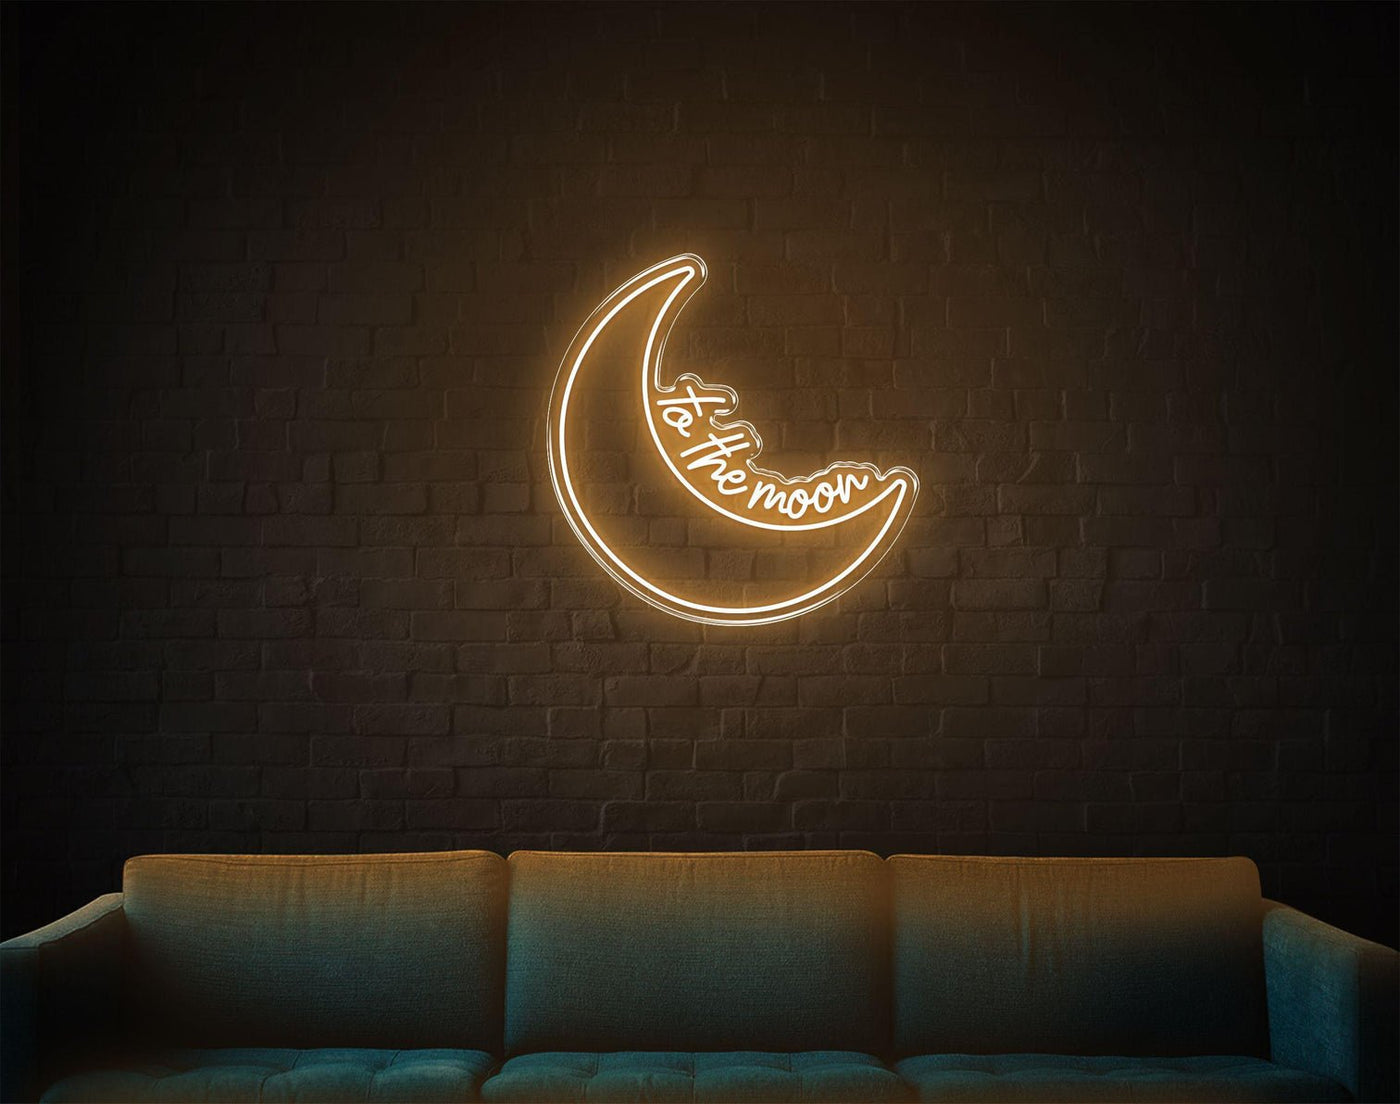 To The Moon LED neon sign - 30inch x 30inchWarm White